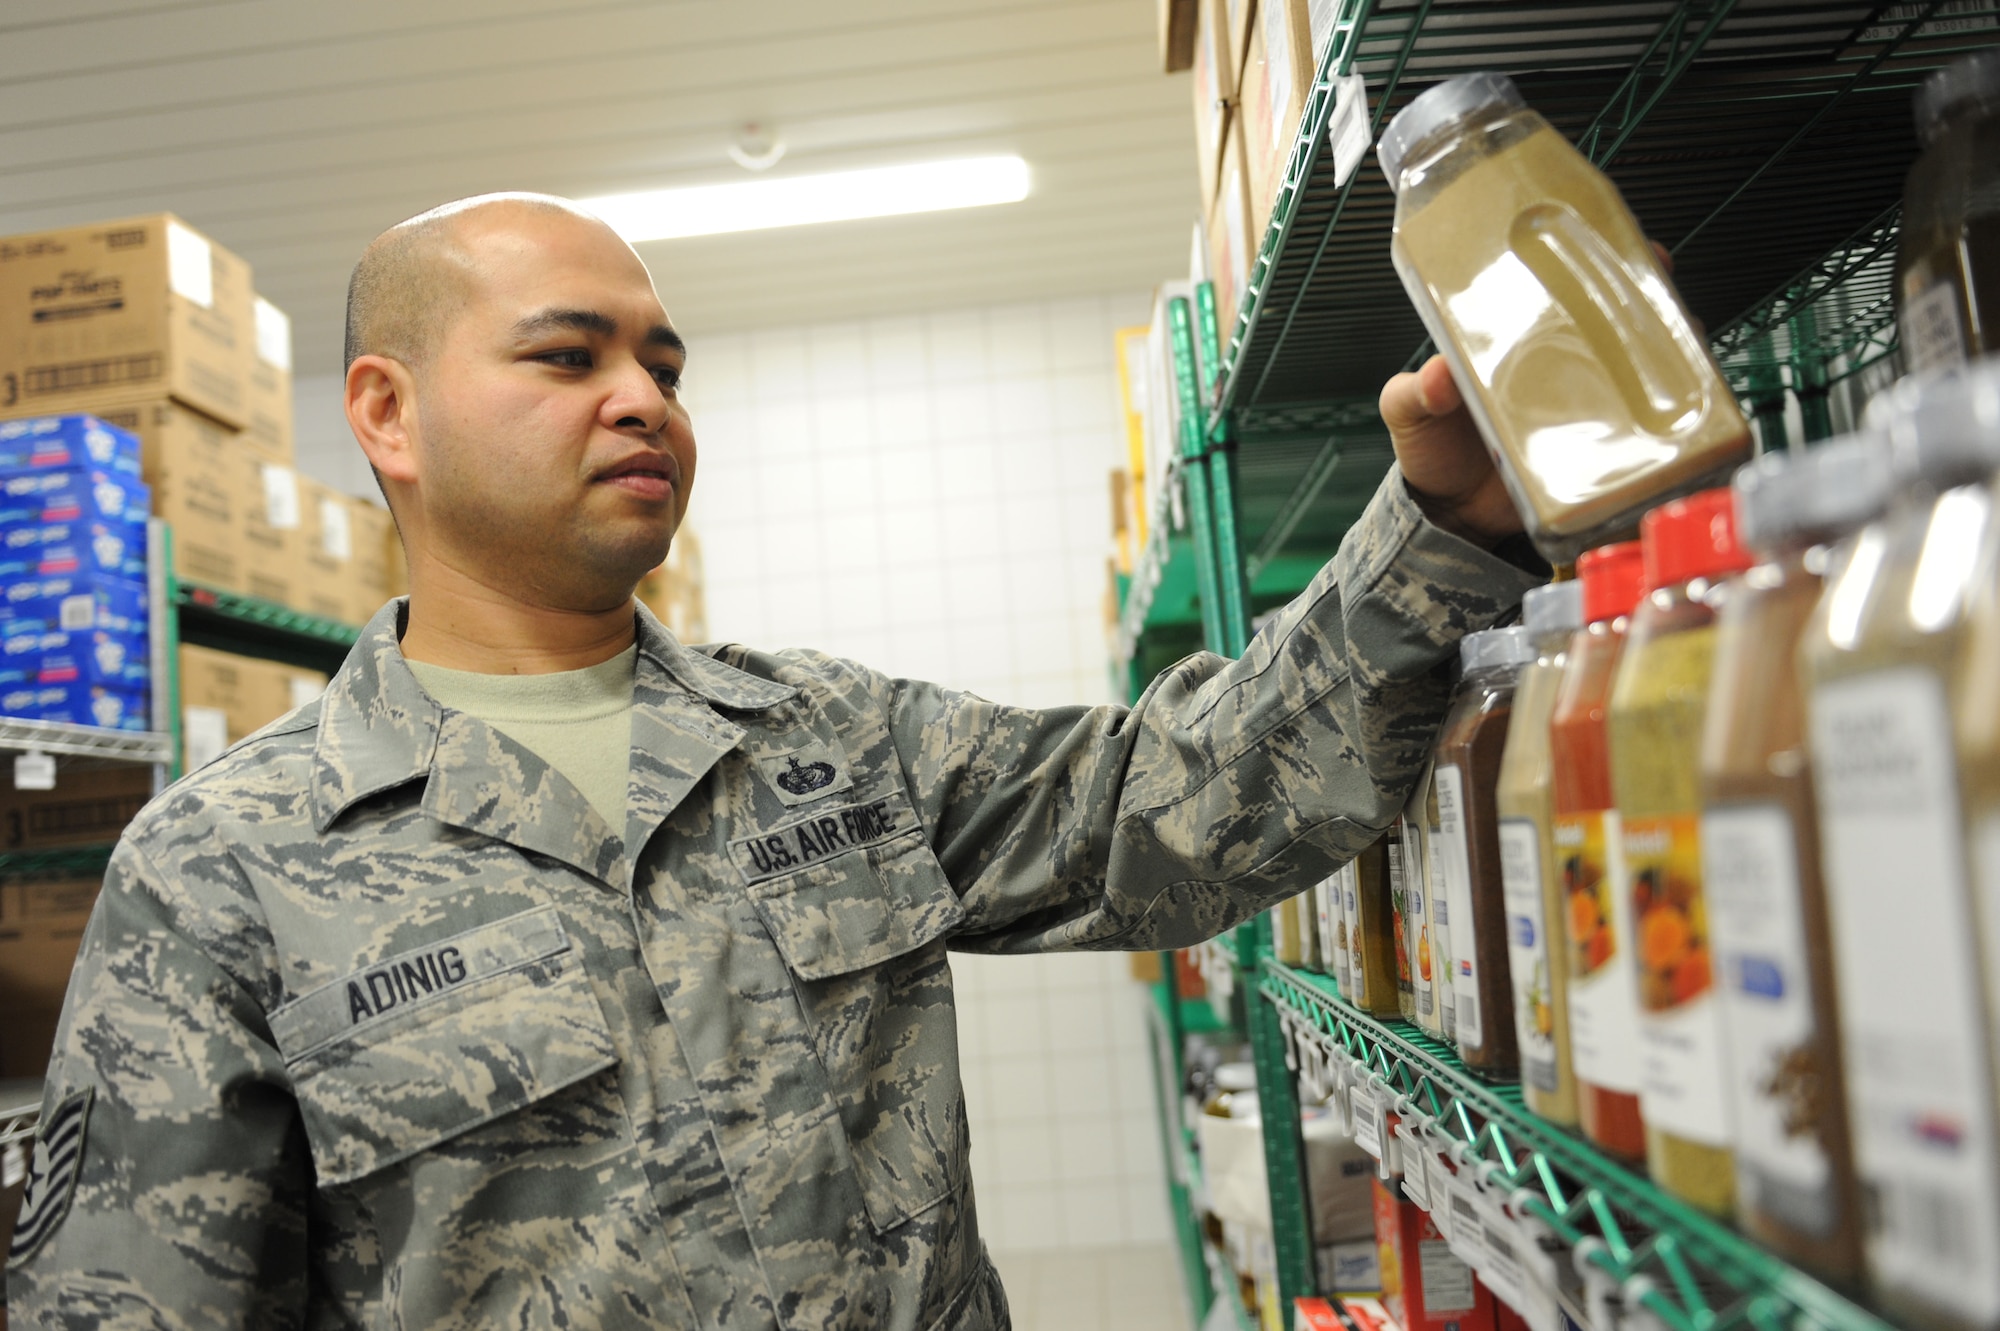 SPANGDAHLEM AIR BASE, Germany – Tech. Sgt. Andrews Adinig, 52nd Force Support Squadron dining facility assistant manager, restocks shelves after a food product delivery at the Mosel Hall Dining Facility here March 13. The DFAC provides fresh meals to more than 4,270 enlisted service members on a daily basis to include breakfast, lunch, dinner and midnight meals. In addition, they provide service to all Department of Defense civilians, military service members and reserve officer training corps cadets with temporary duty orders. The DFAC also provides service to all family members and retirees on a case by case base, such as Thanksgiving, Christmas and Air Force birthdays. (U.S. Air Force photo by Senior Airman Christopher Toon/Released)